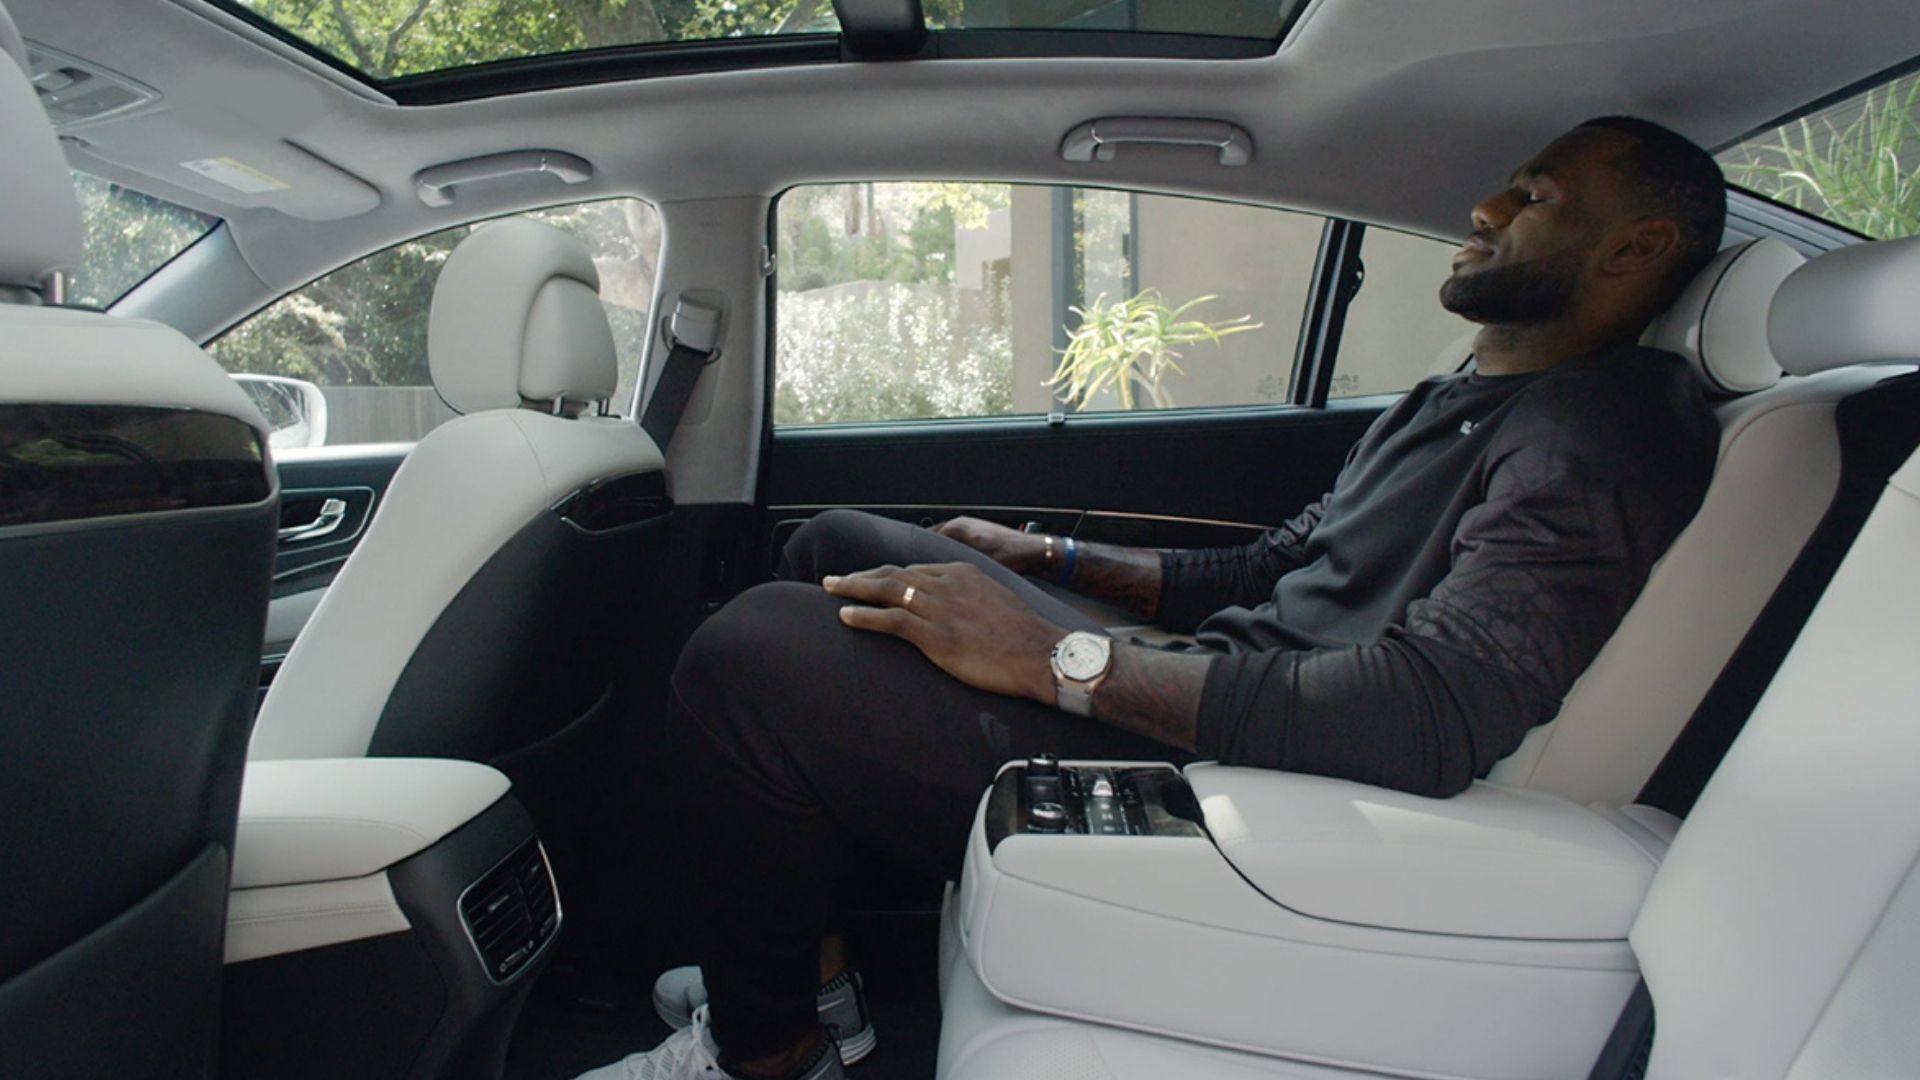 Check Out LeBron James's Car Collection